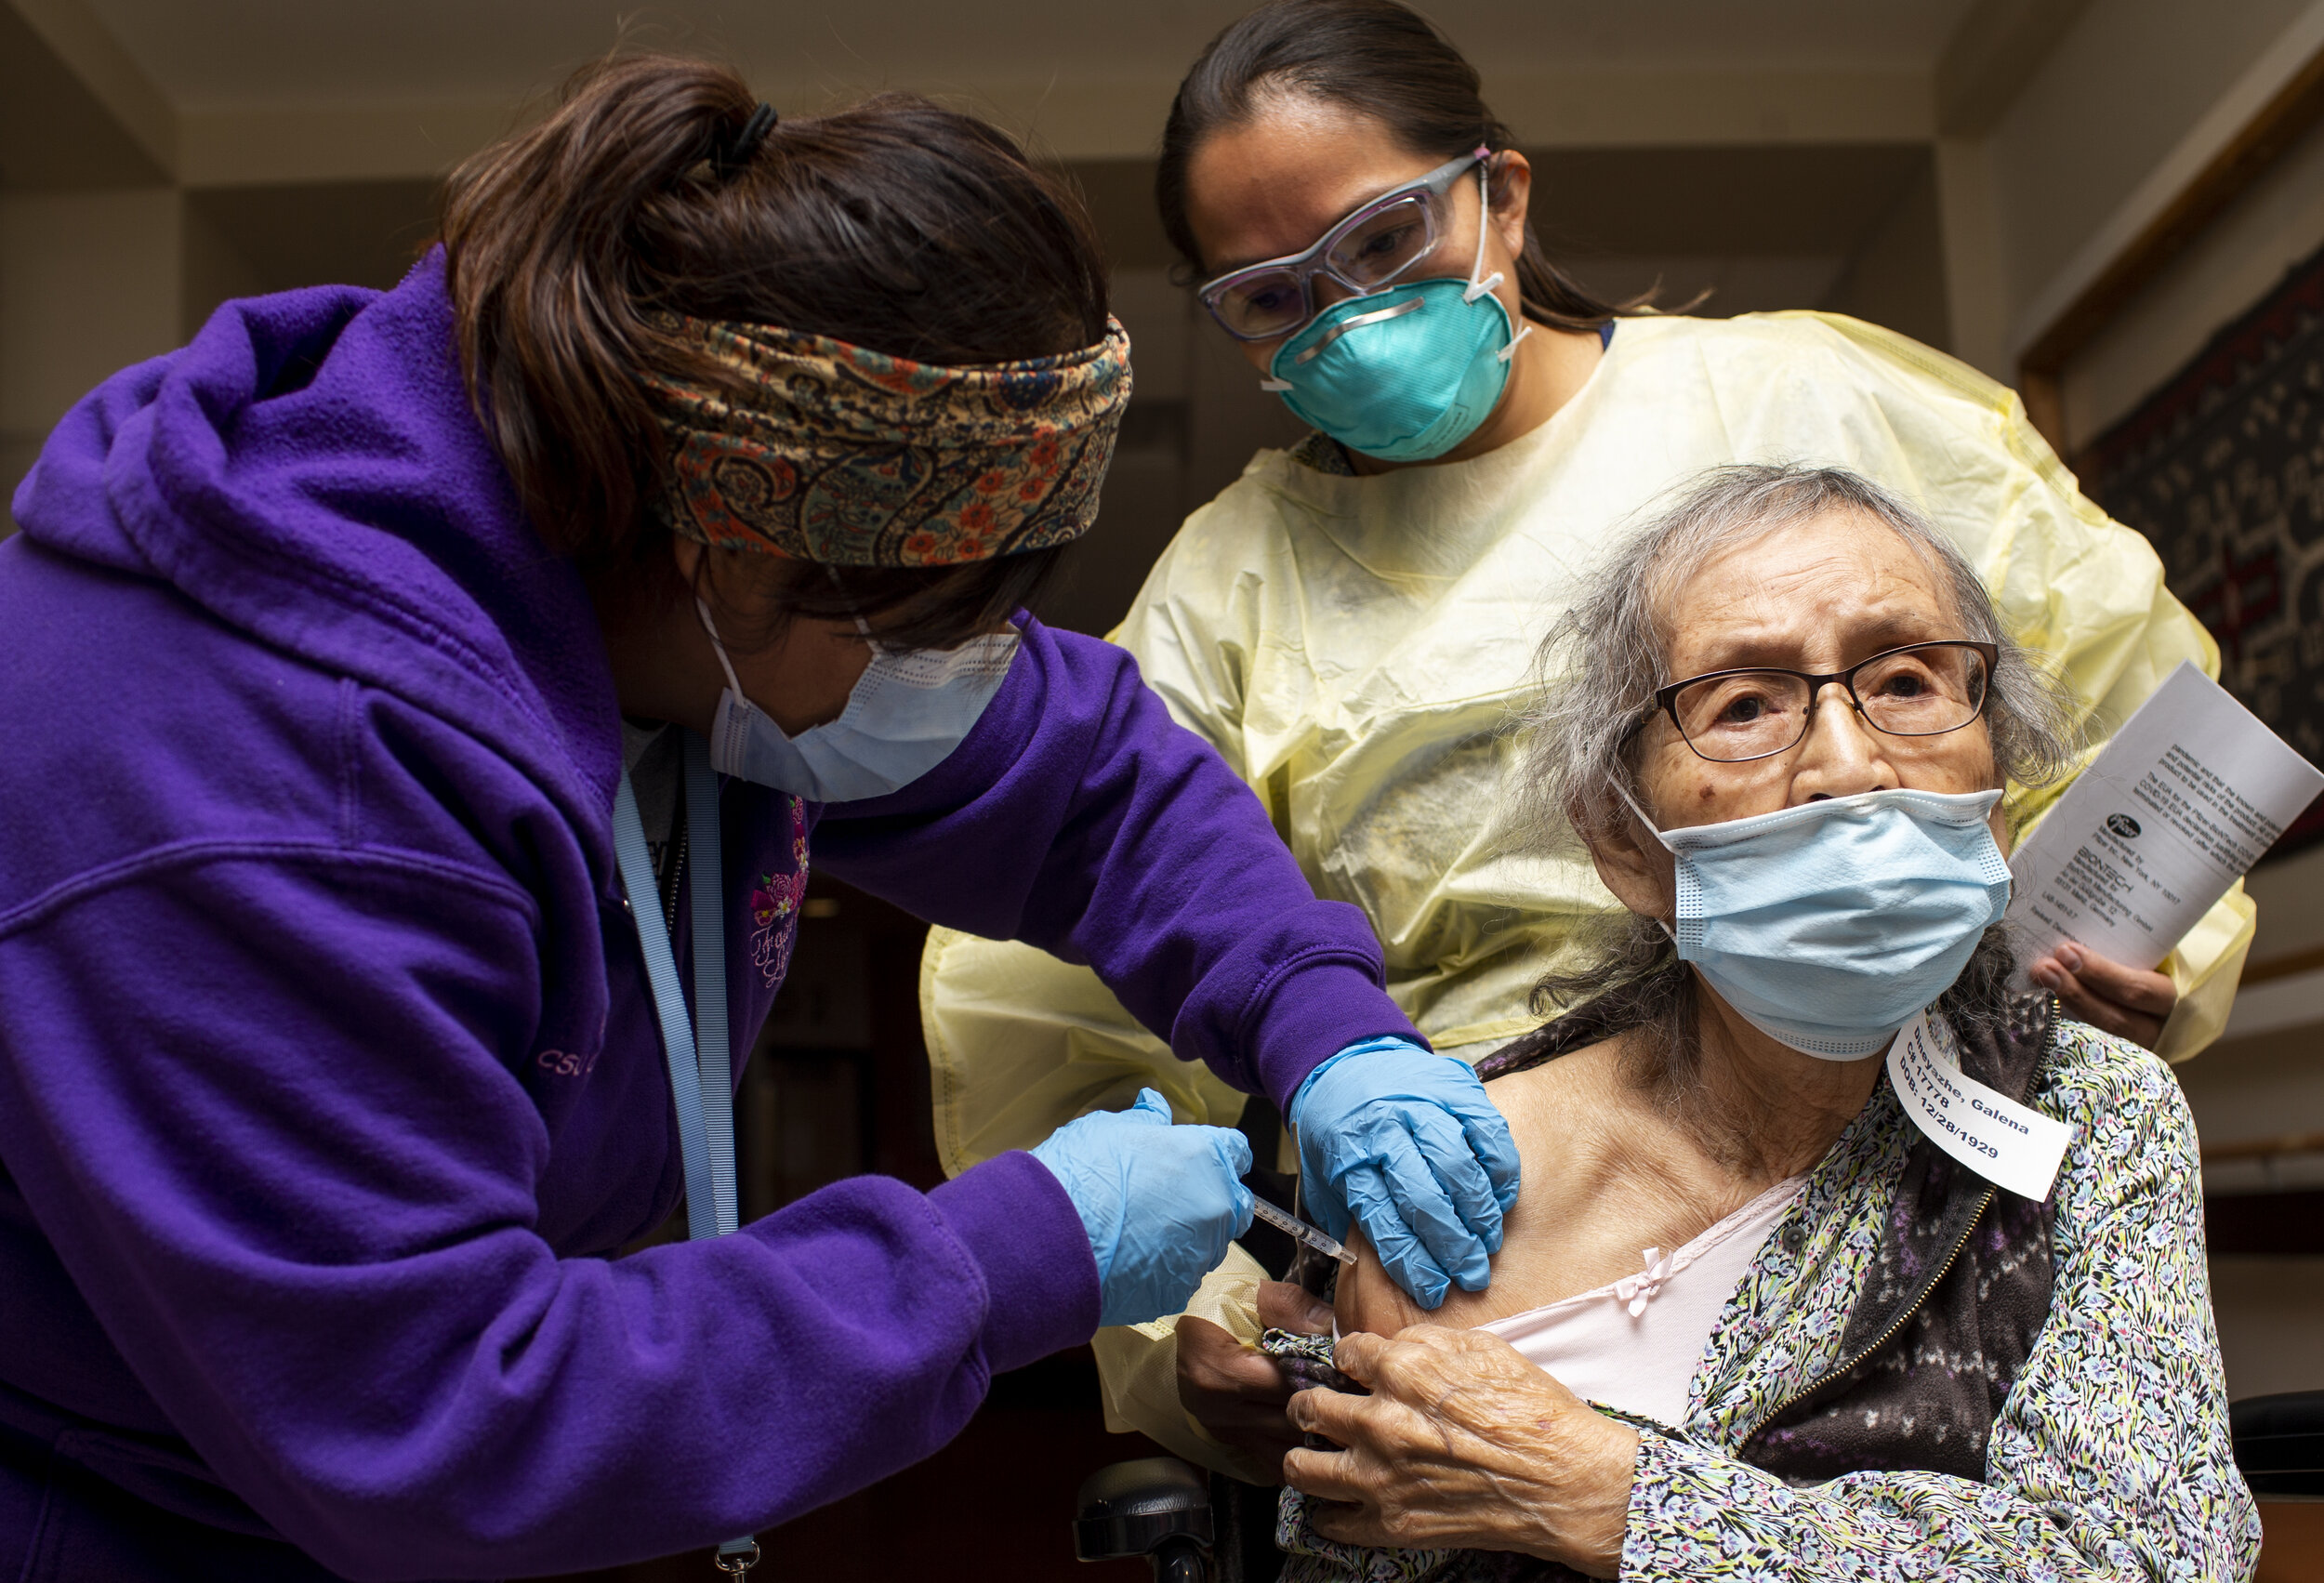  Medical assistant Vangie Yazzie (left) administers the Pfizer COVID-19 vaccine to Galena Dineyazhe (right) as director of nursing Monica Jones (back right) watches at the Dr. Guy Gorman Senior Care Home on the Navajo Nation in Chinle, Ariz. on Dec. 